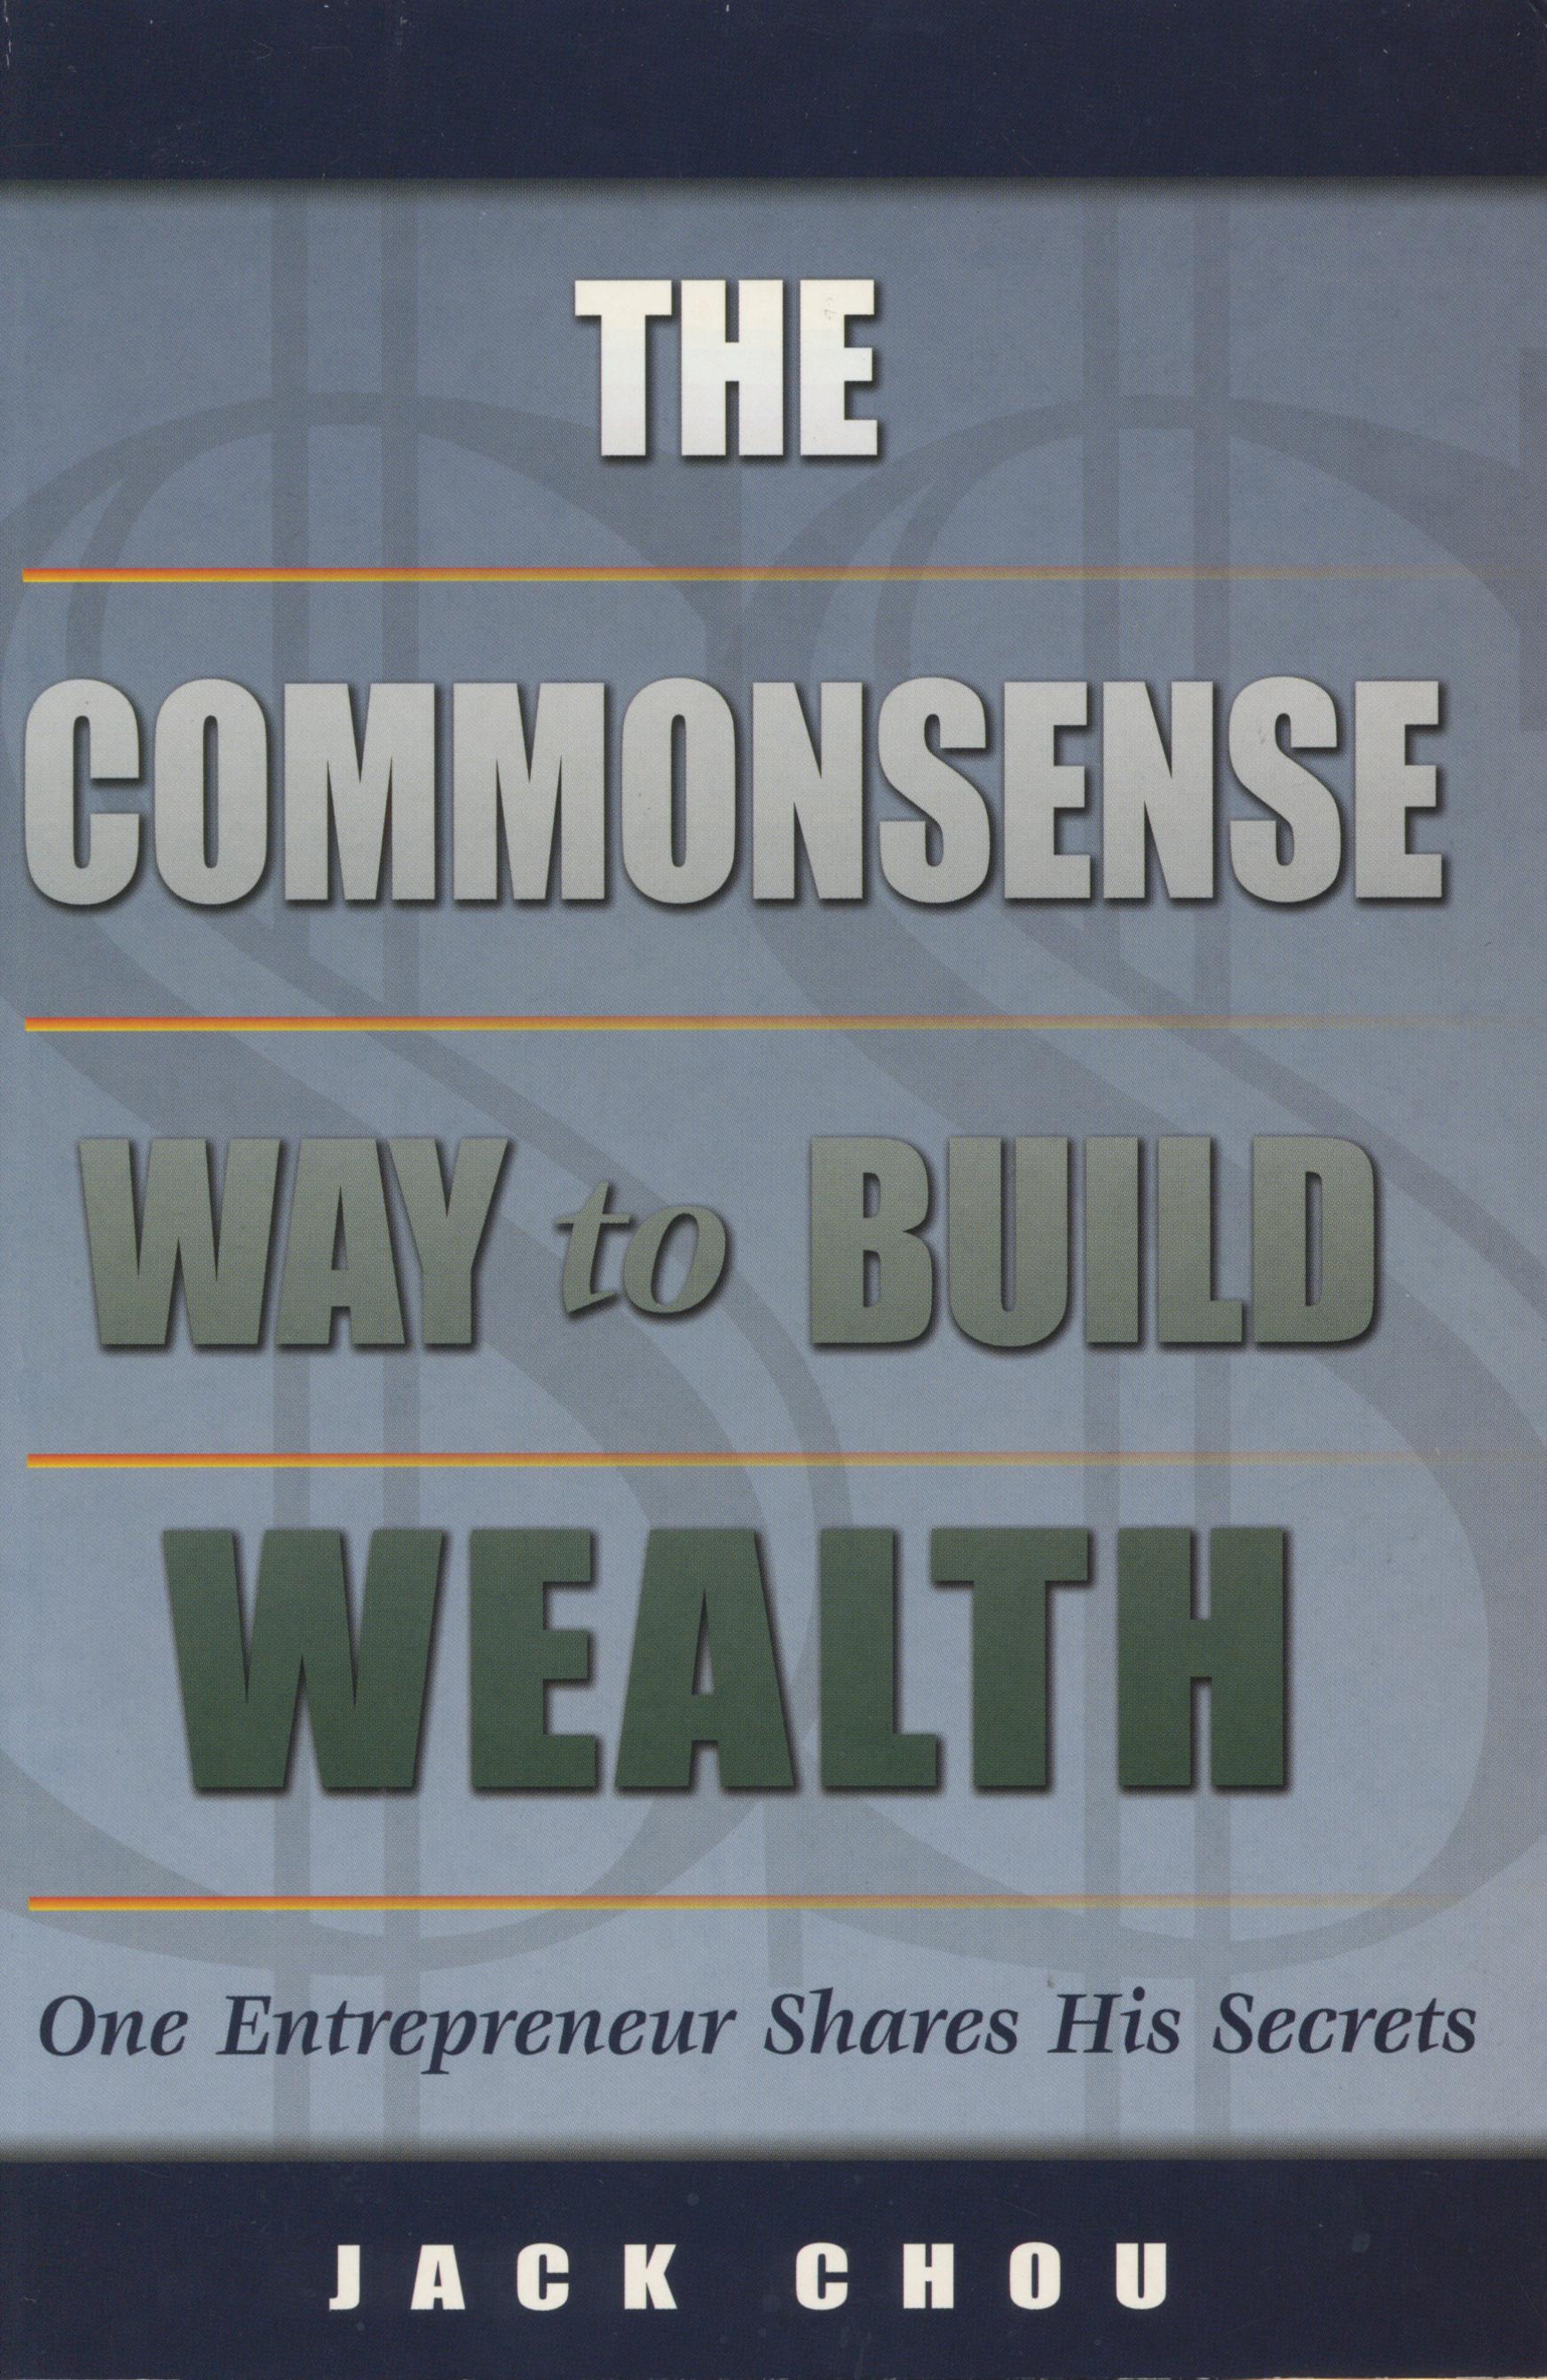 1284. The Commonsense Way to Build Wealth/Jack Chou/2004